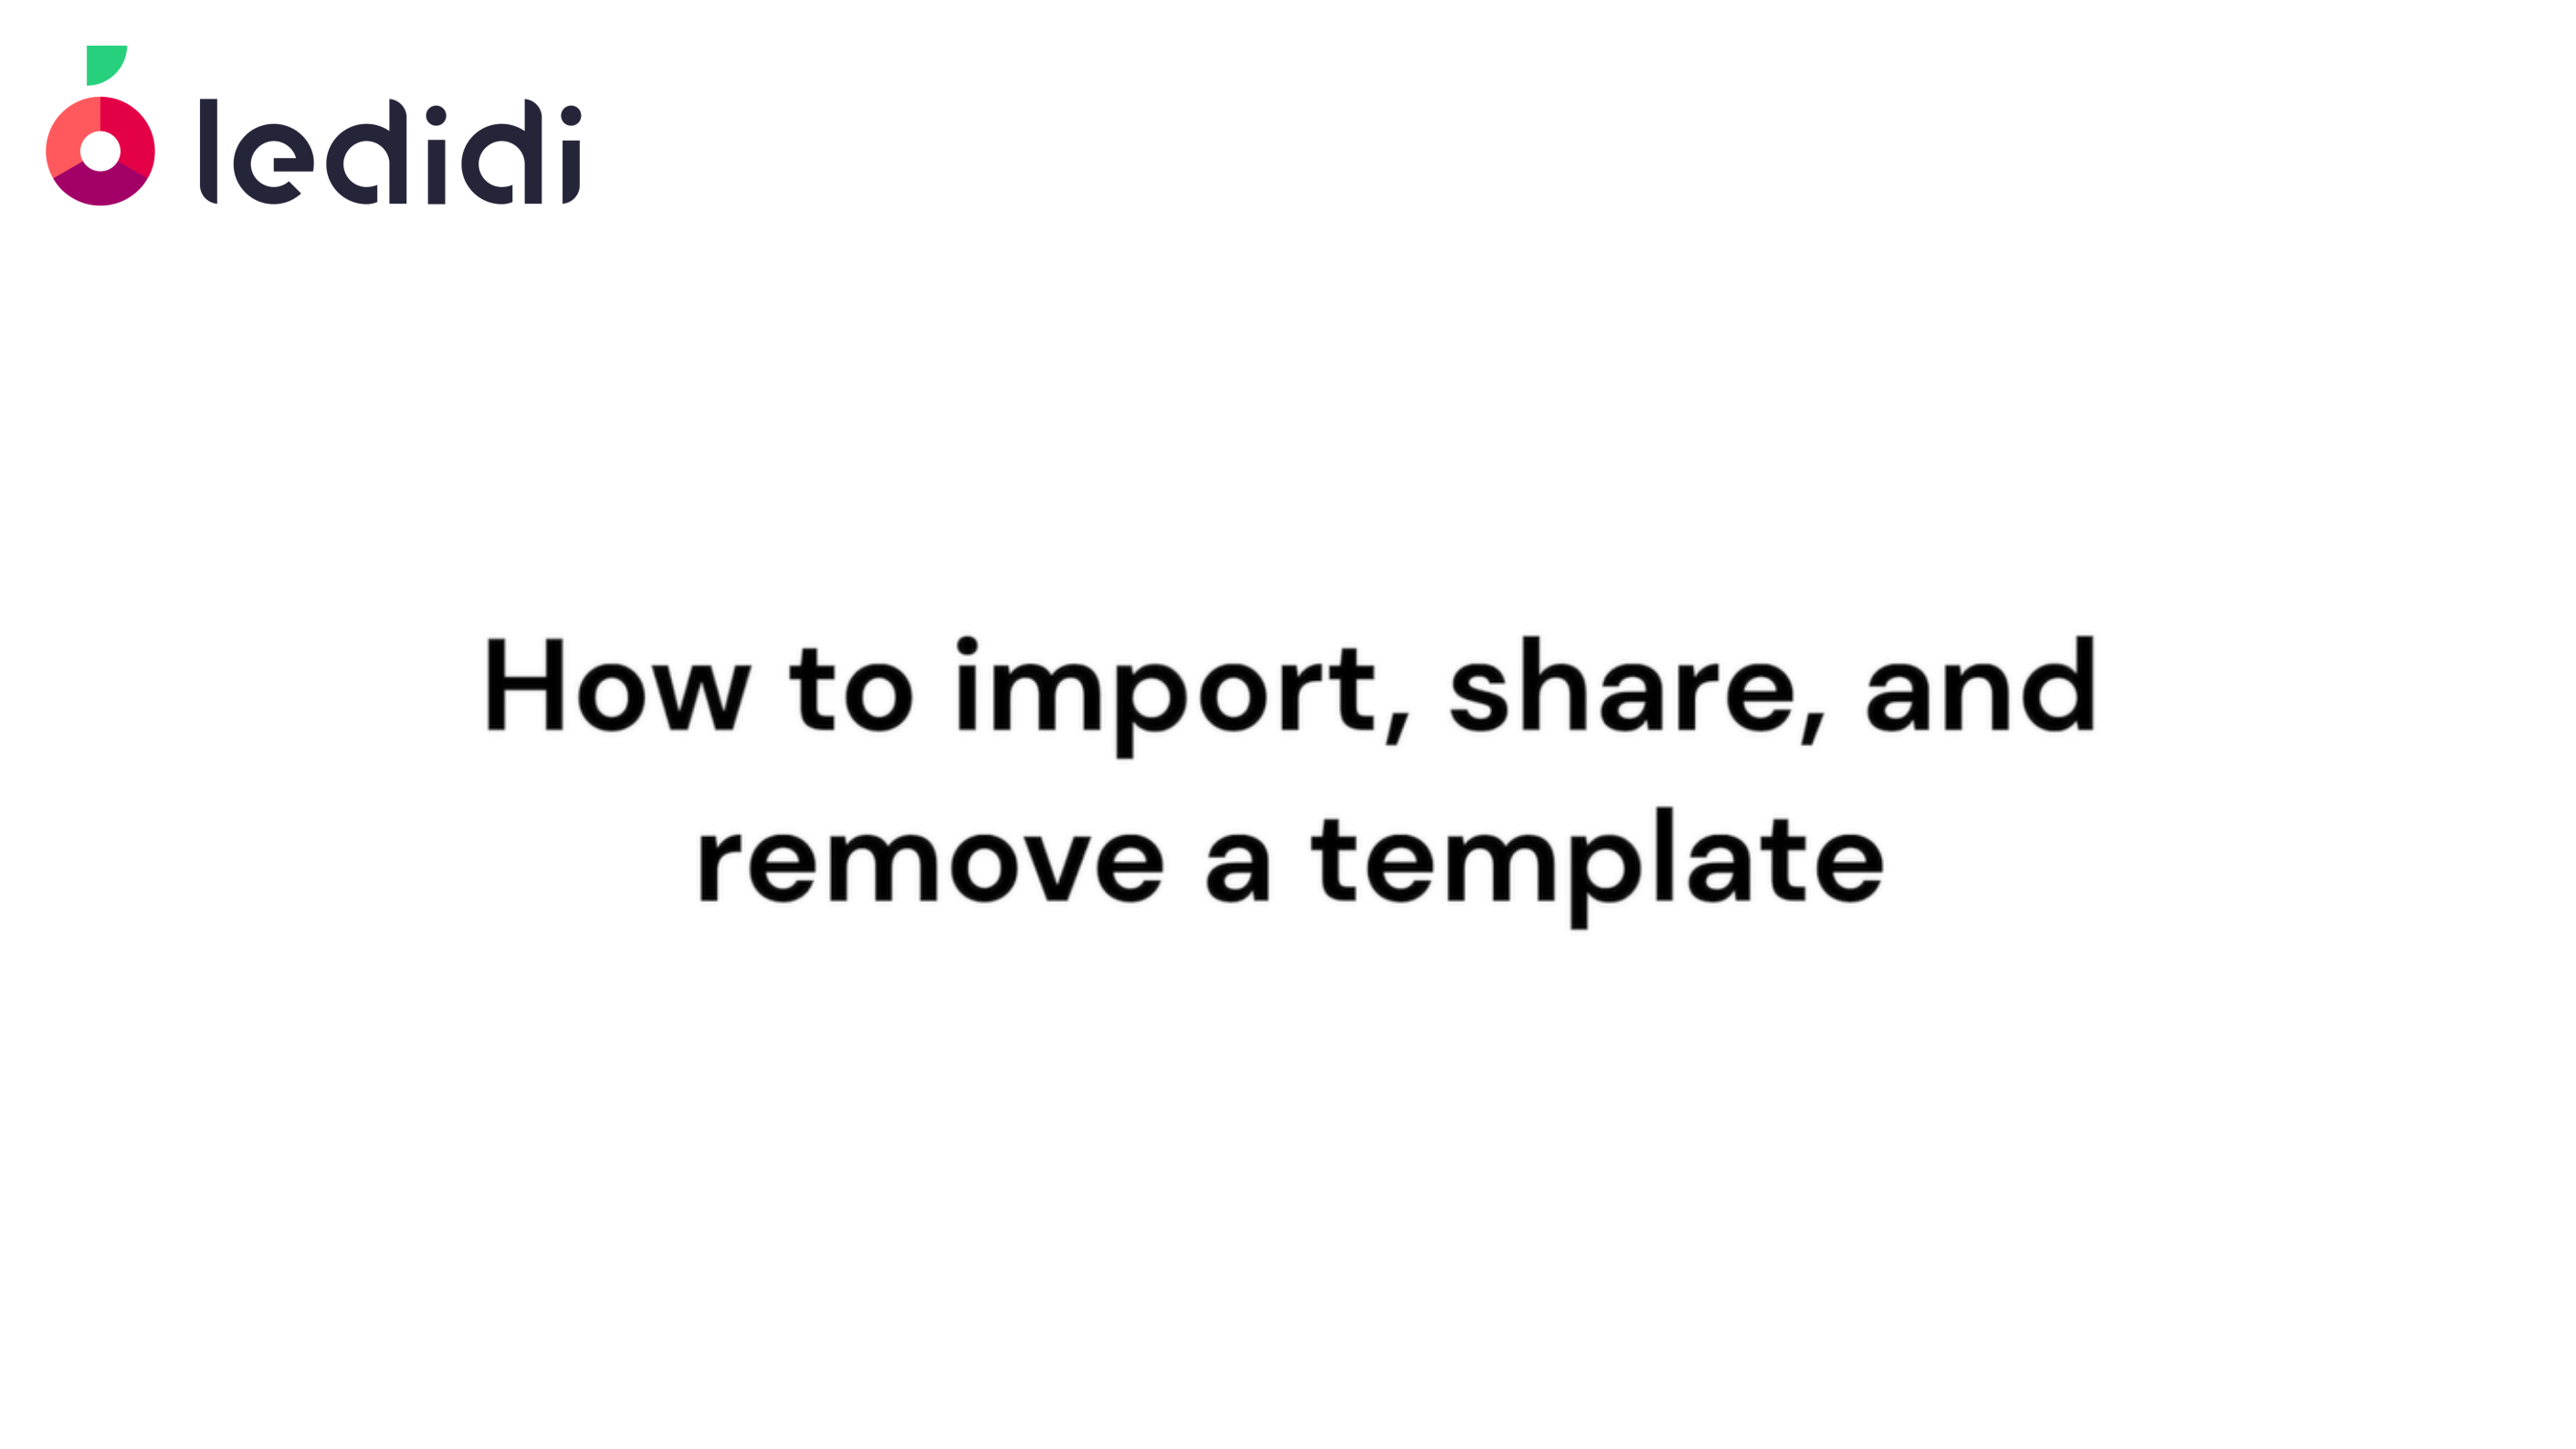 How to import, share, and remove a template